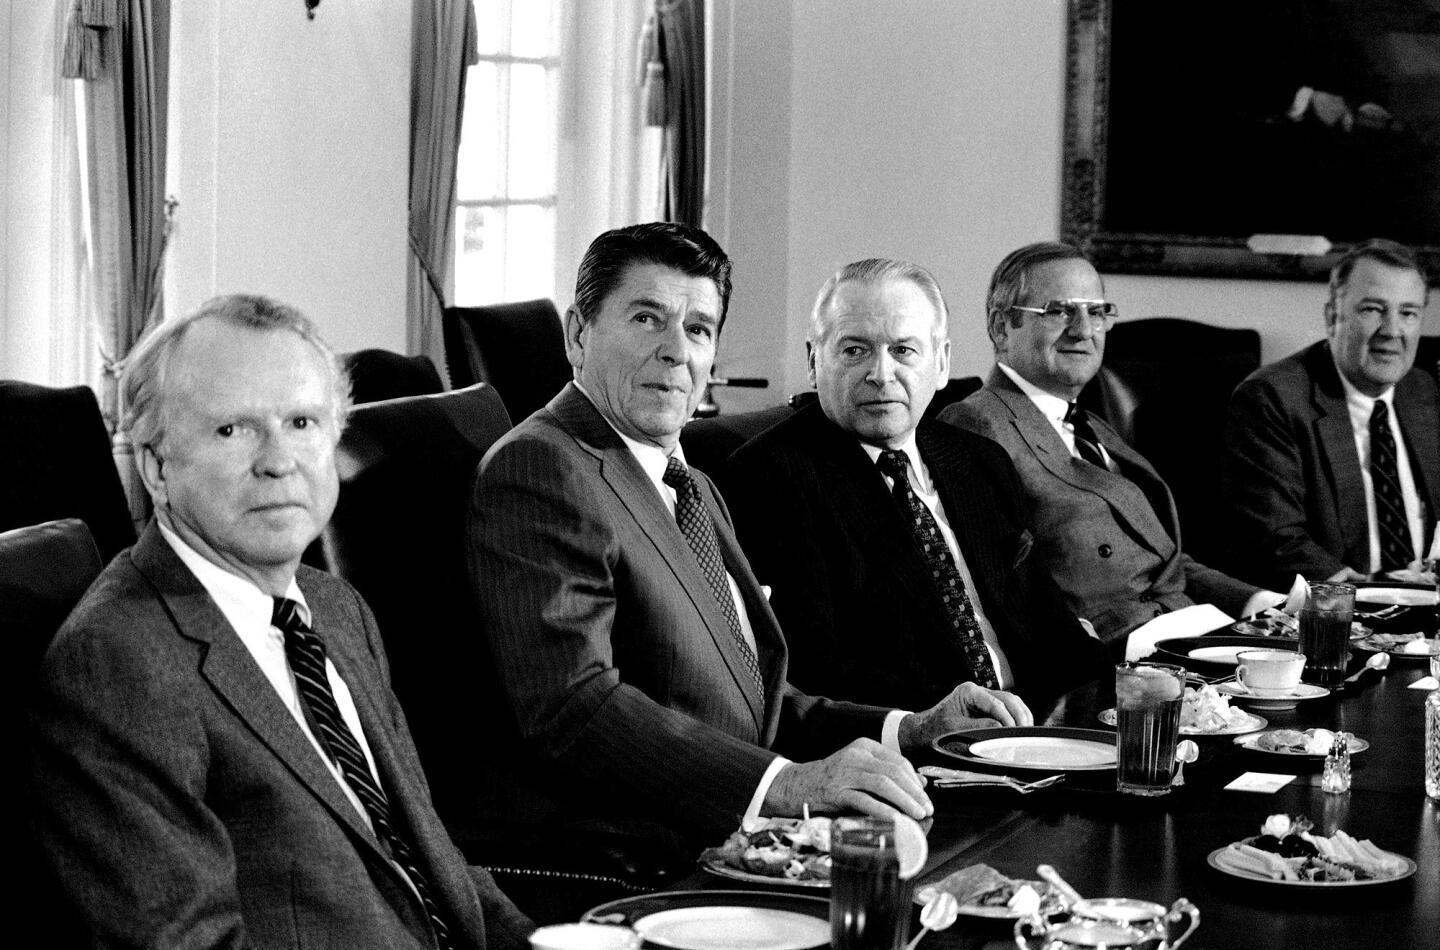 President Reagan, second from left, meets with auto industry executives including Ford President Phillip Caldwell, center, and Chrysler President Lee Iacocca during a luncheon in the White House Cabinet room in Washington on Dec. 19, 1981.